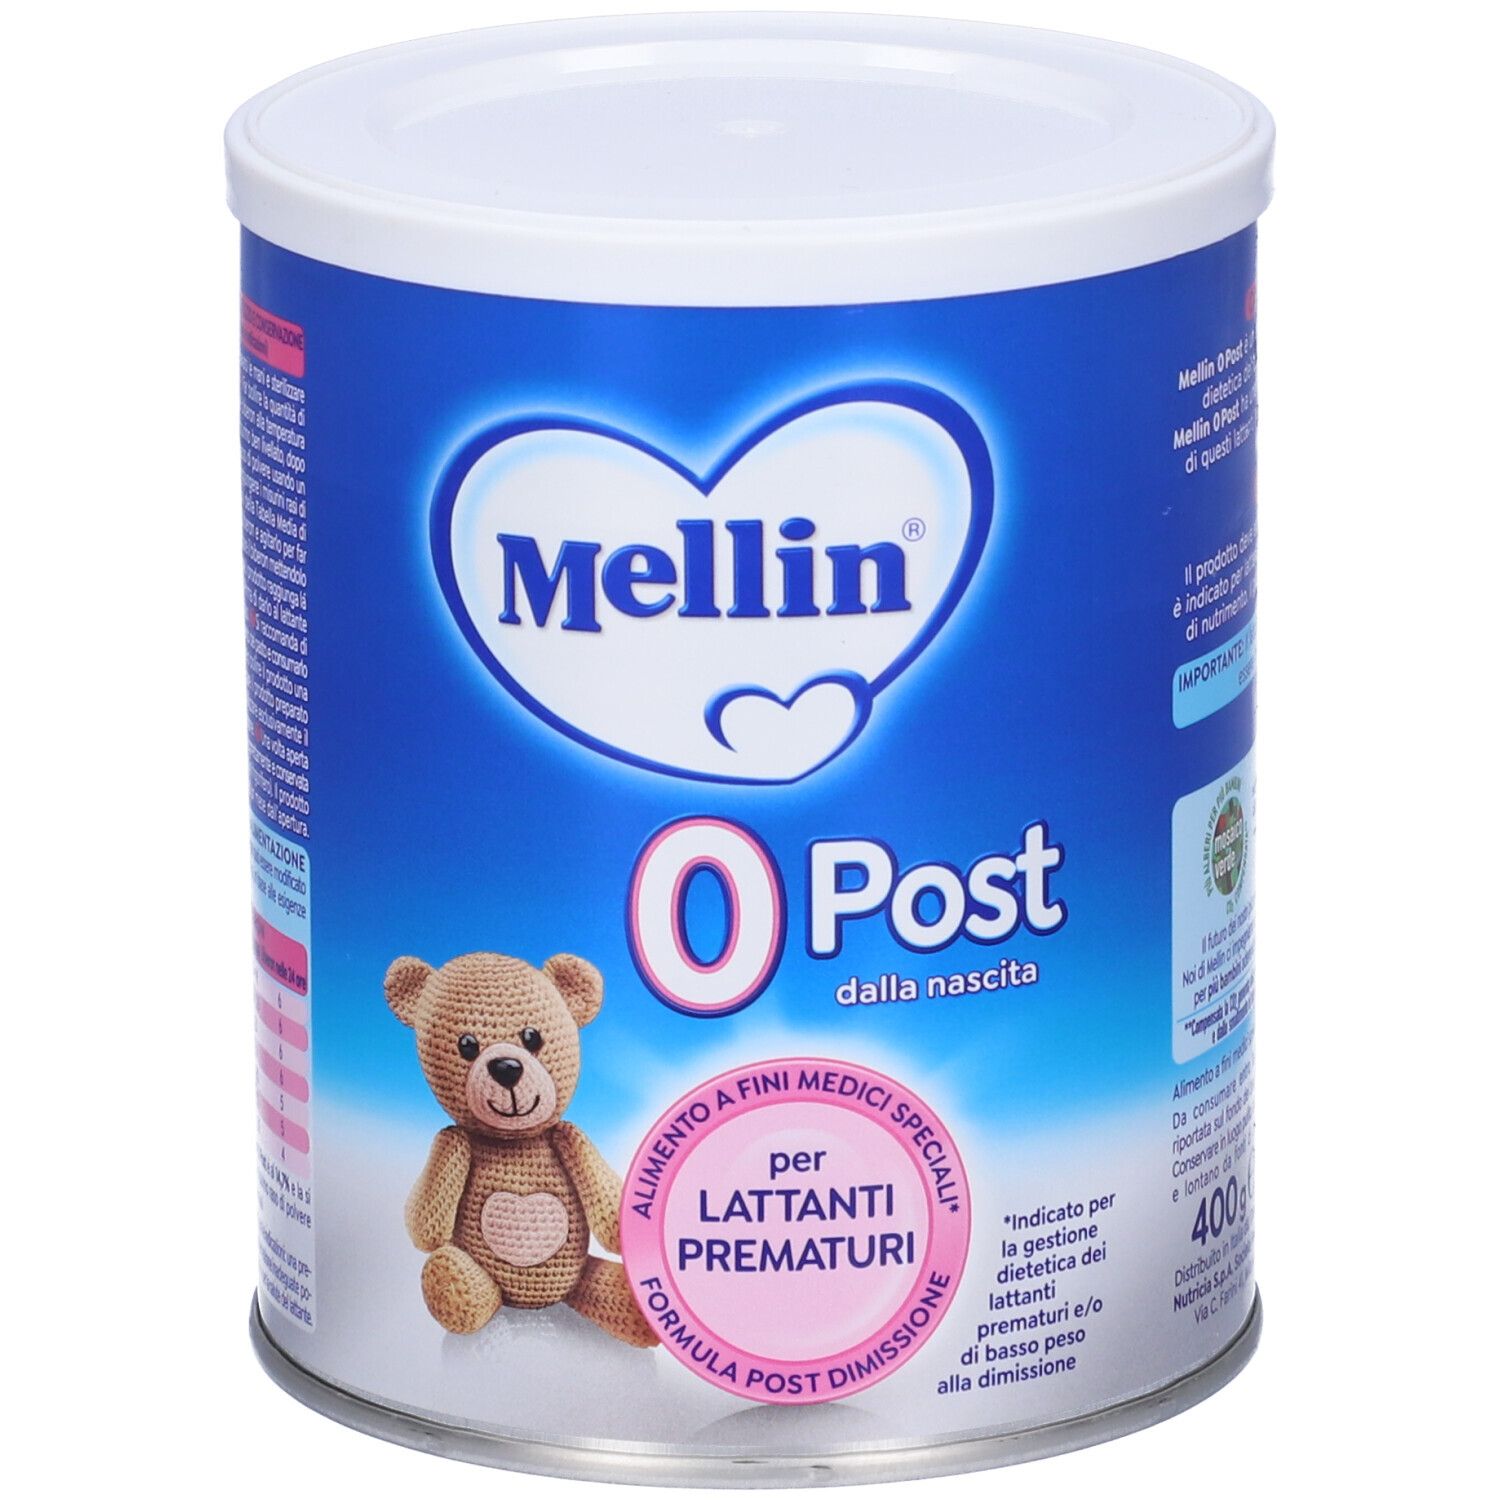 Image of Mellin 0 Post 400g